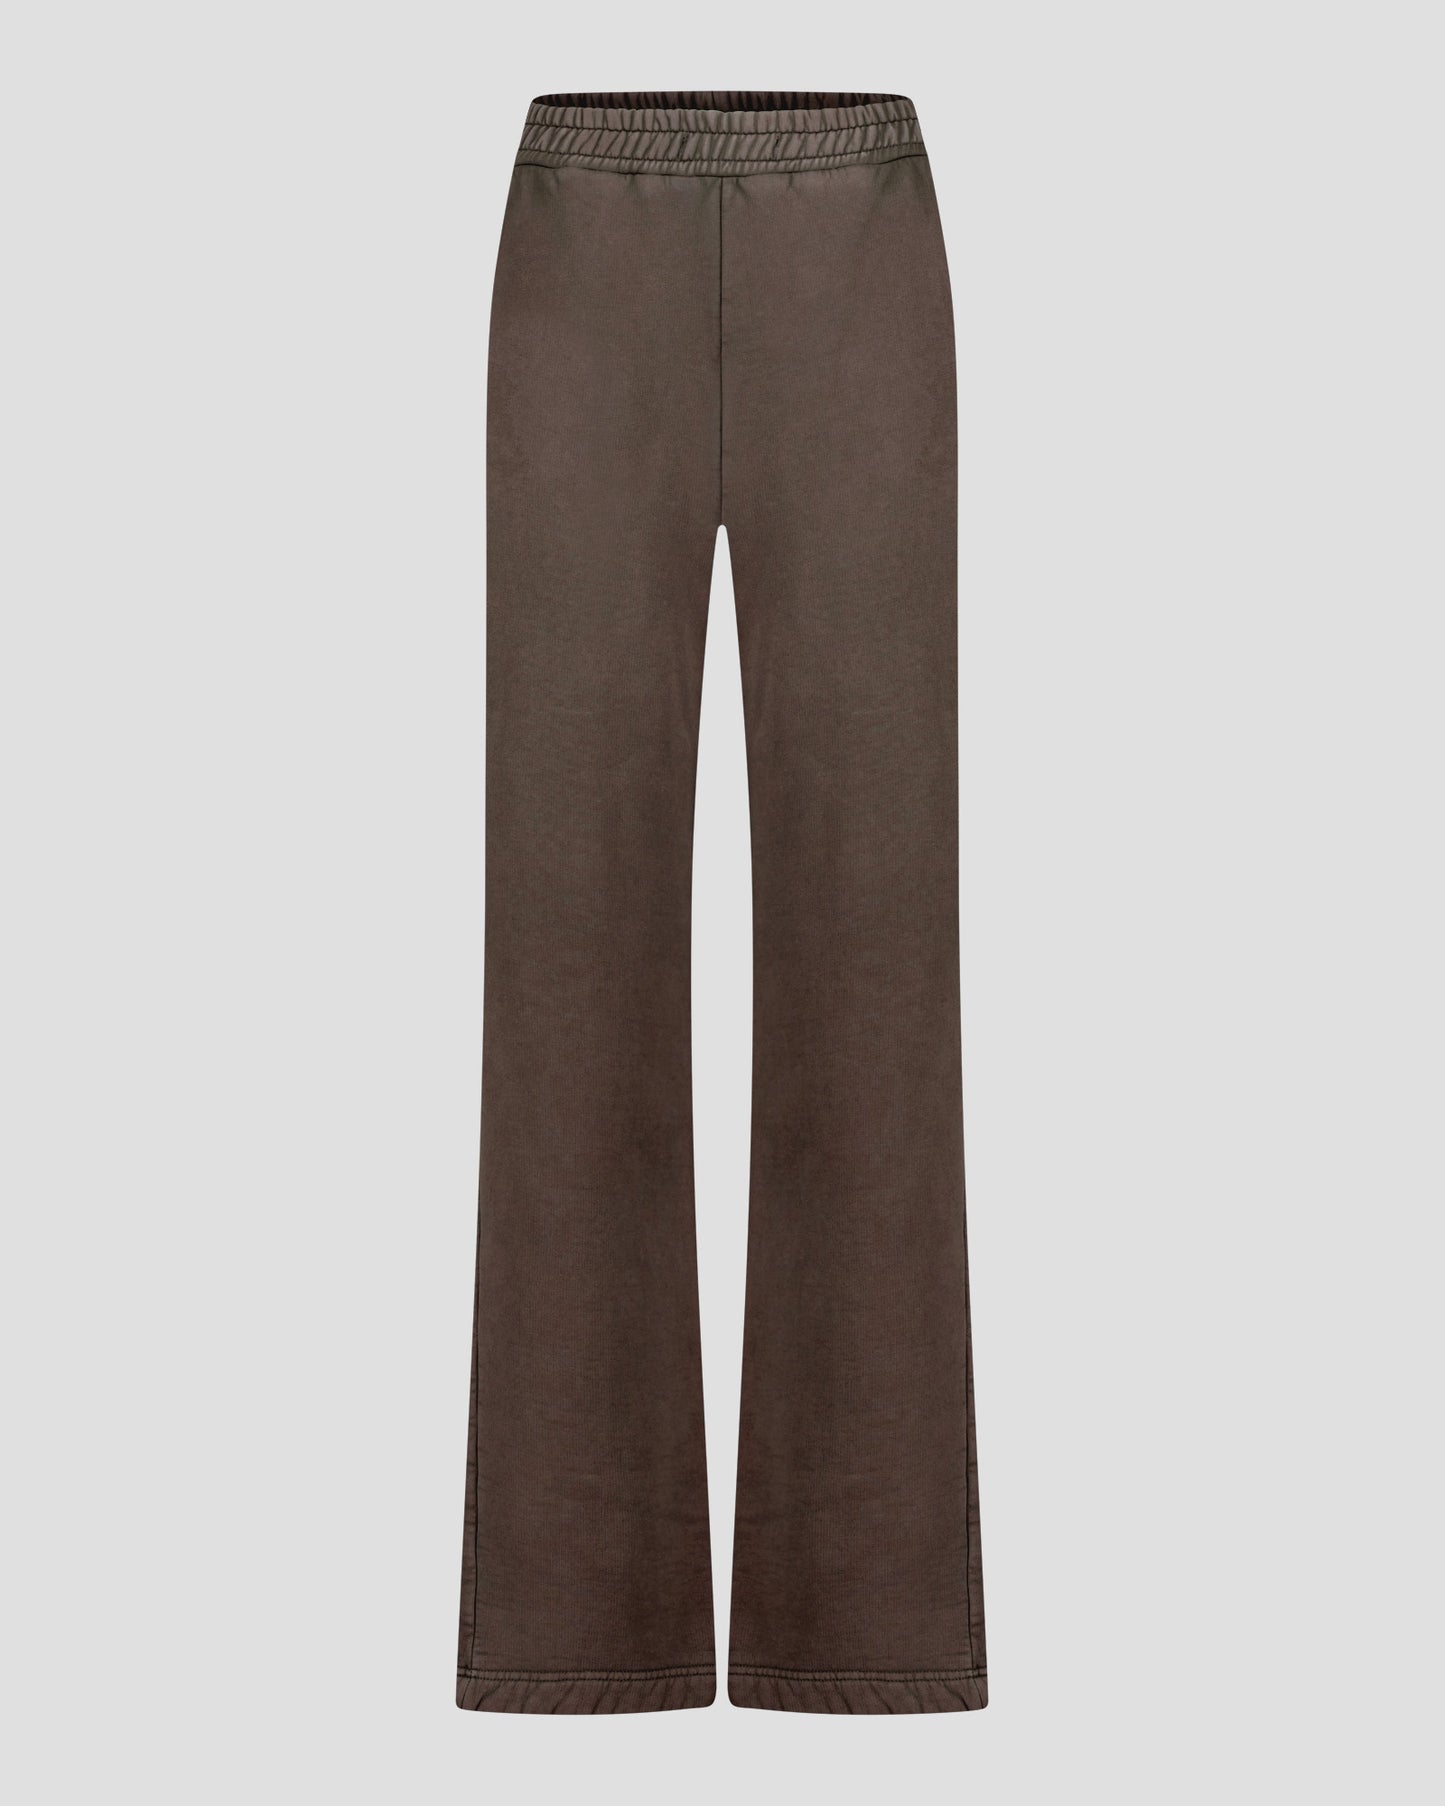 Worn Out Straight Leg Sweatpants Brown